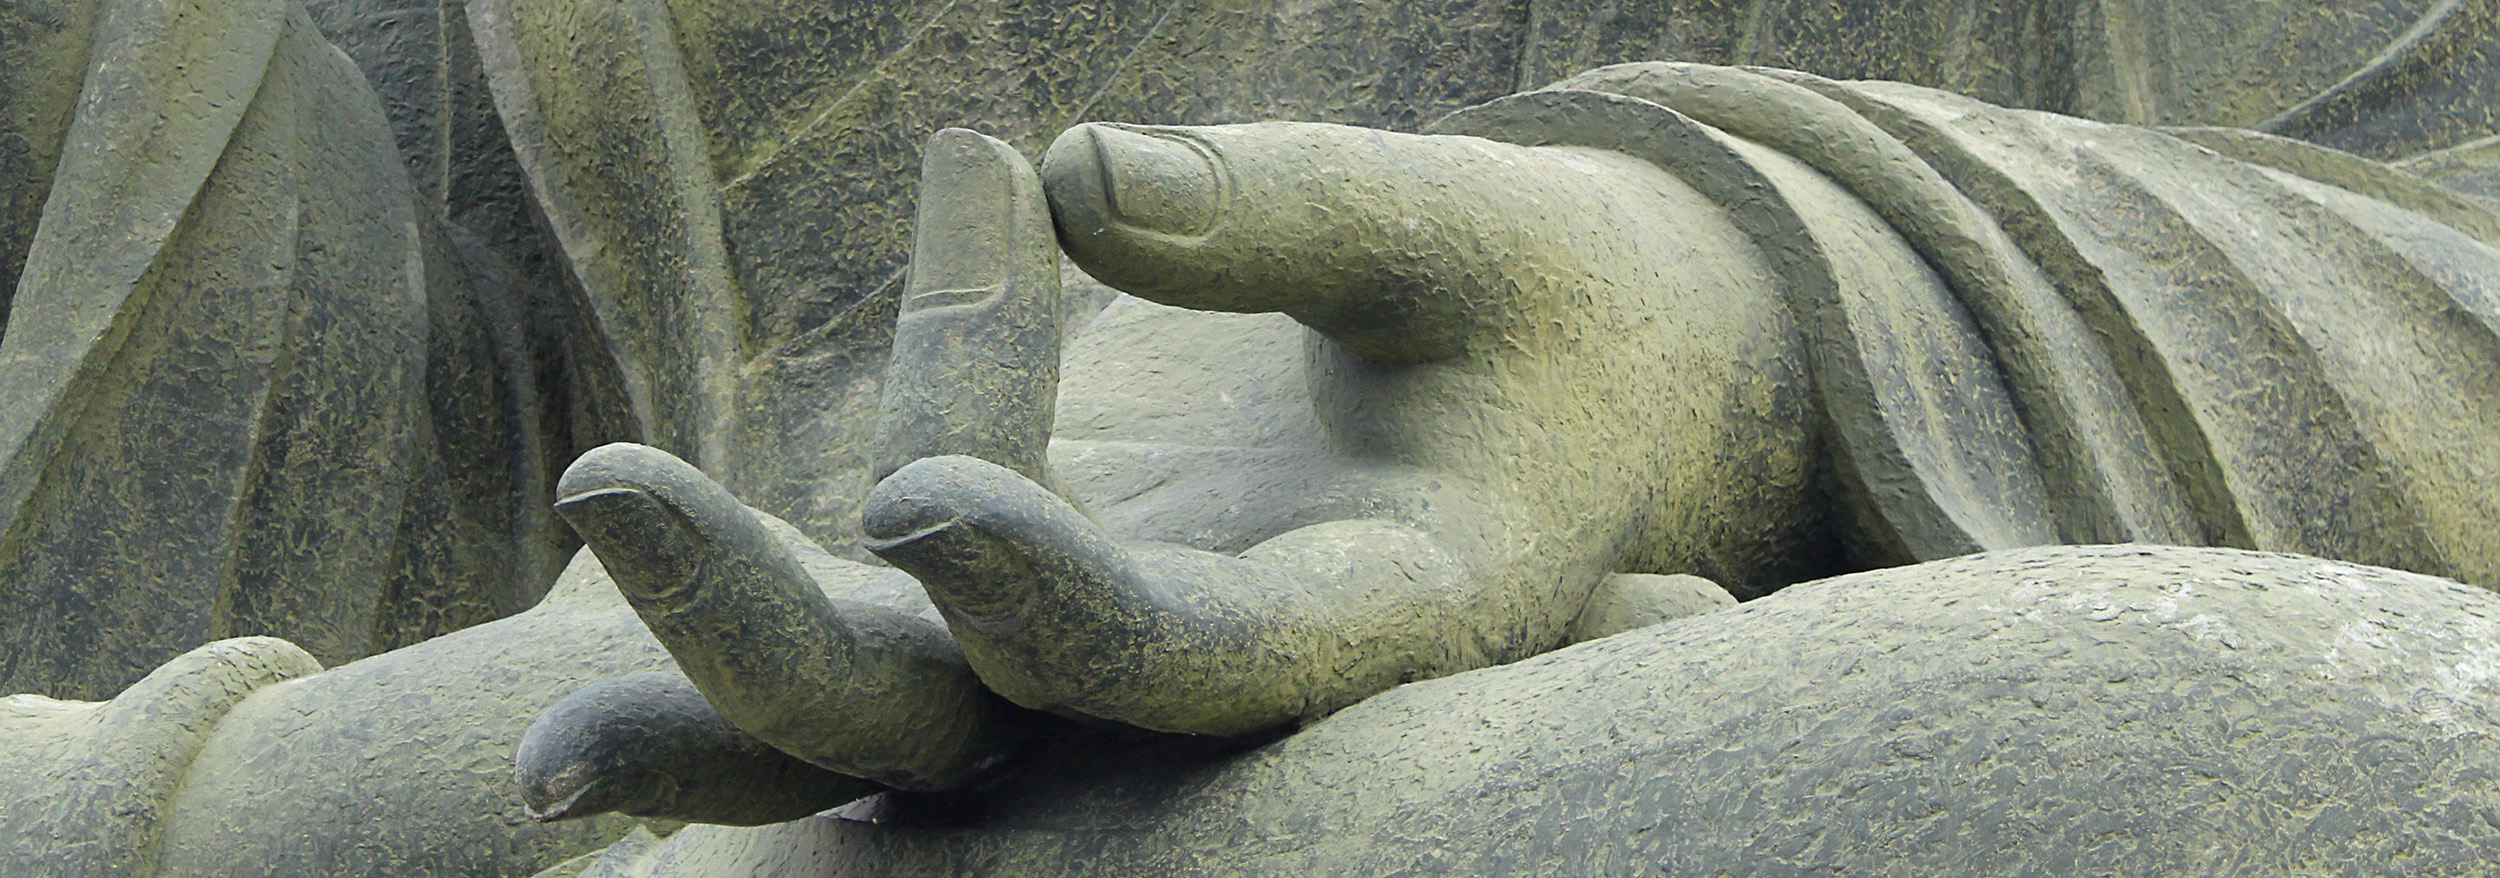 Sacred Gestures Mudras in Buddhist Iconography